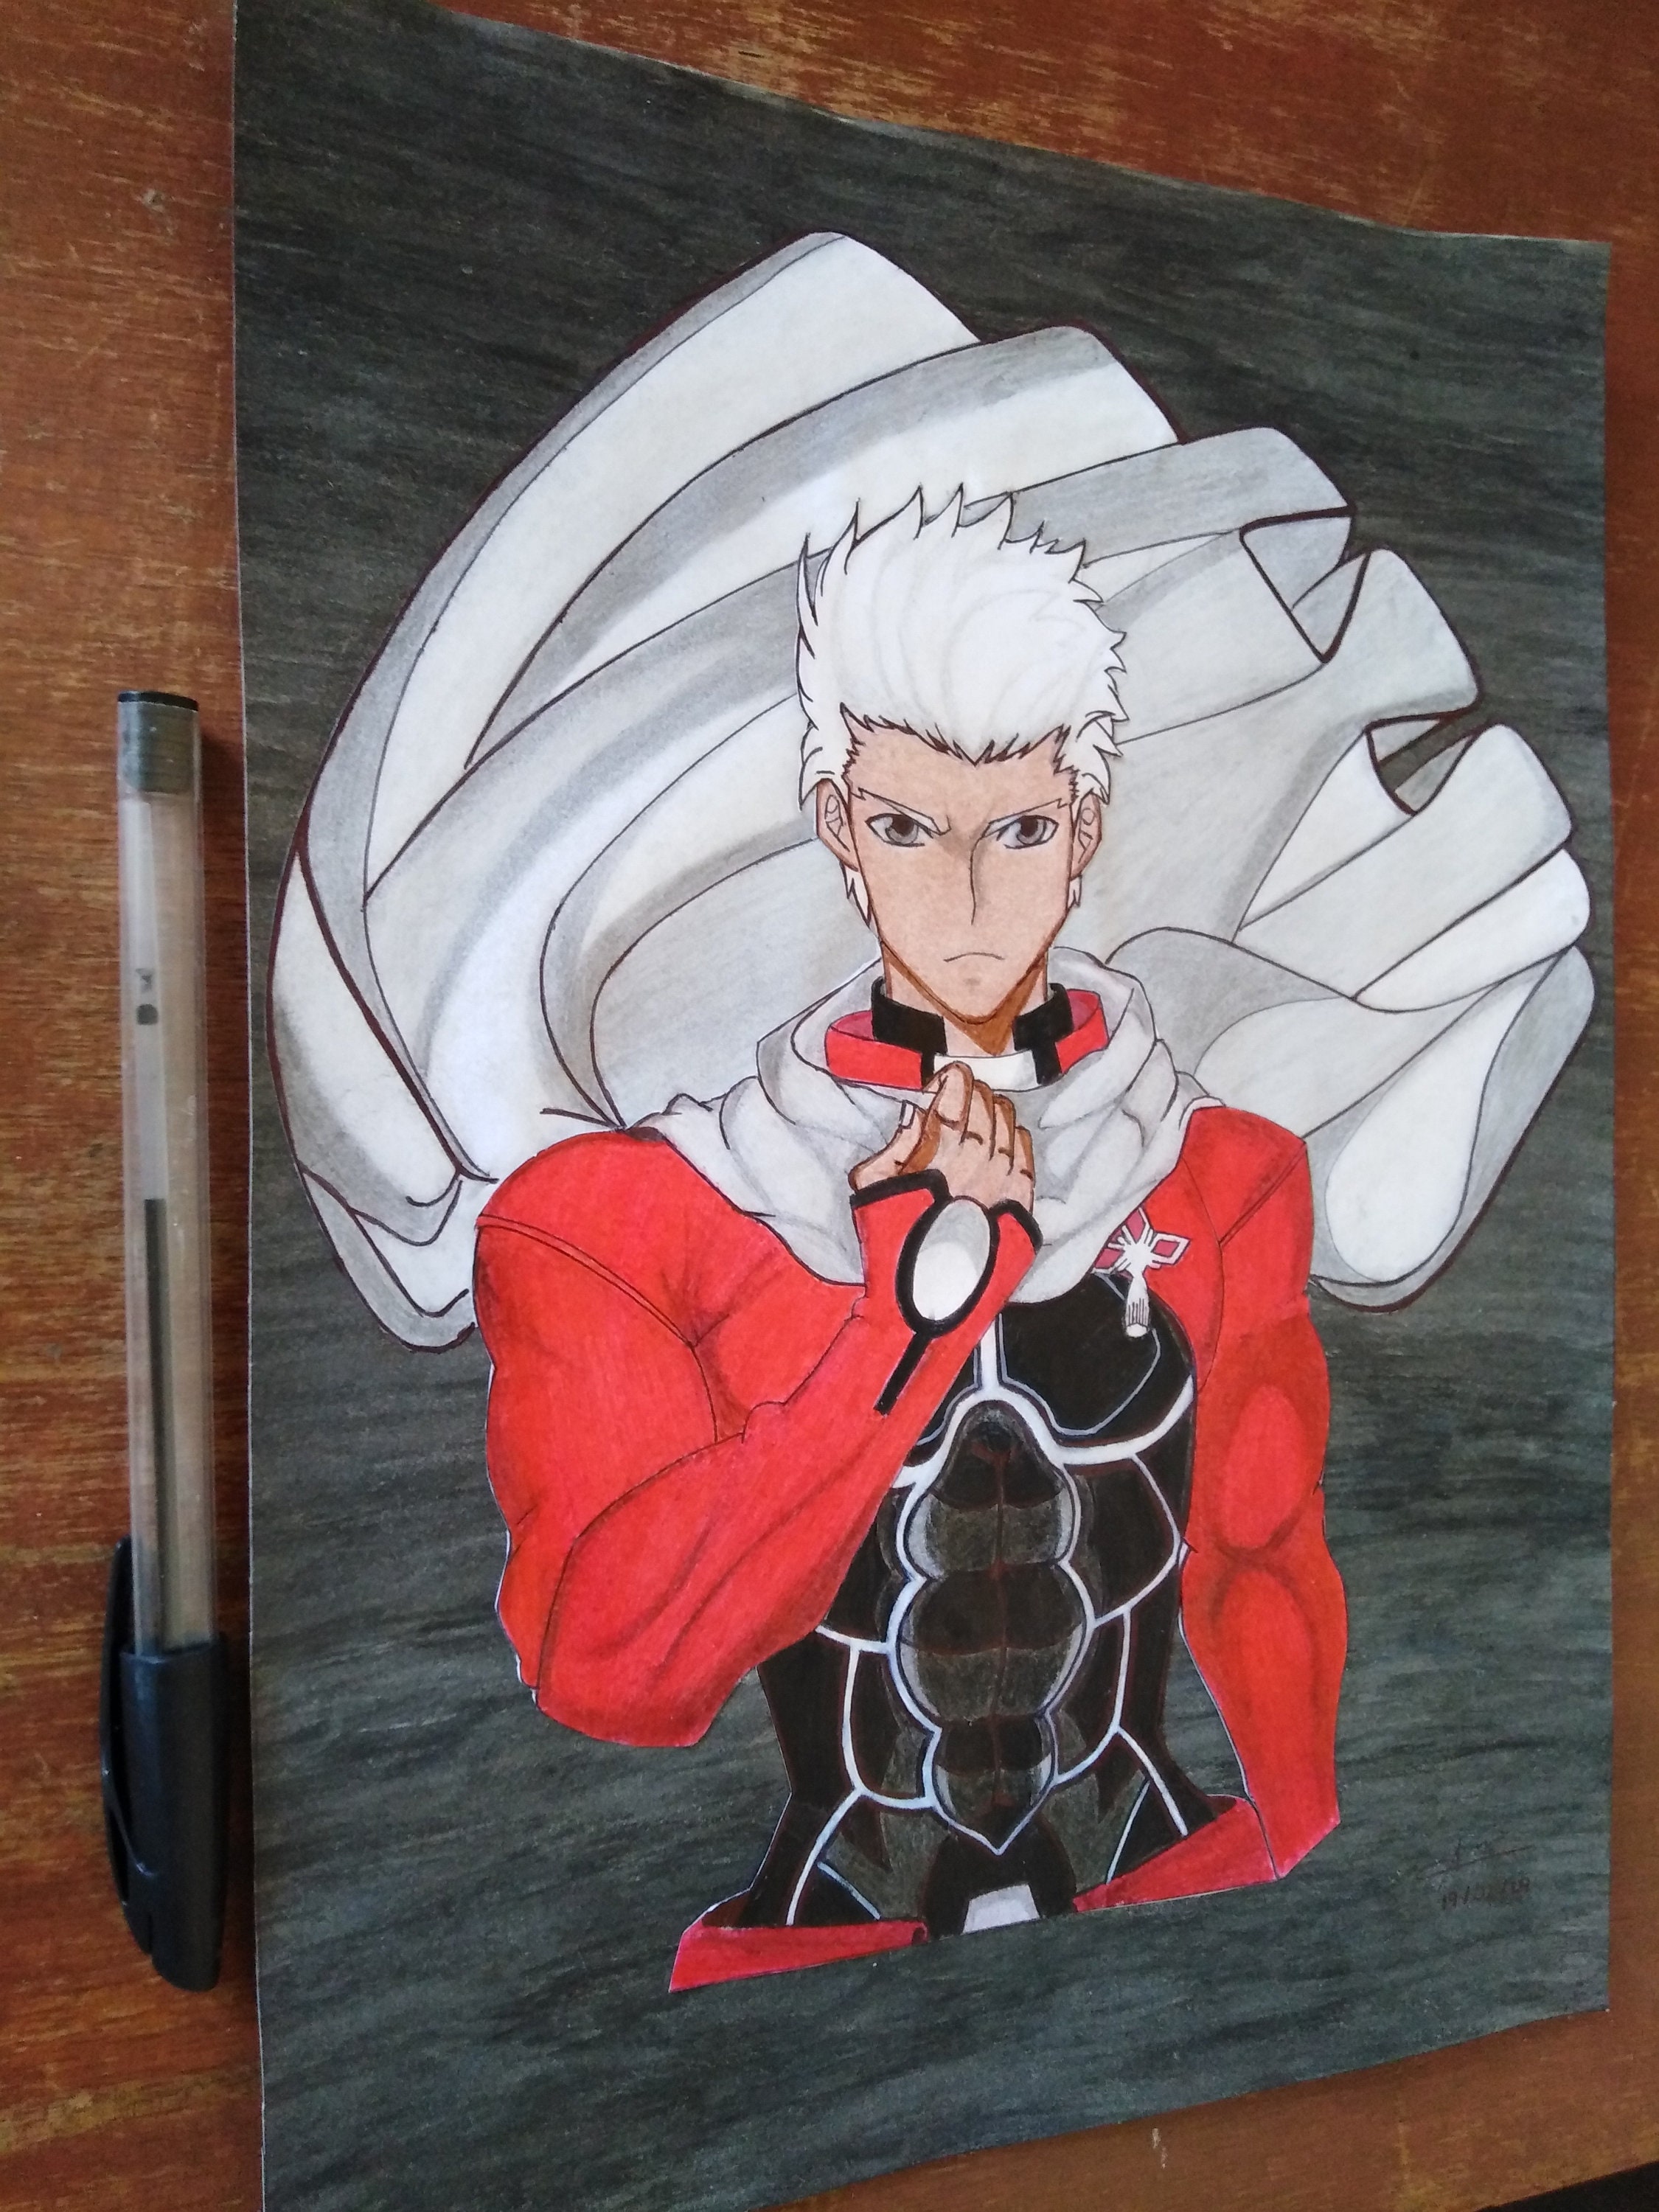 Fate/stay night Unlimited Blade Works to Draw for a Specific